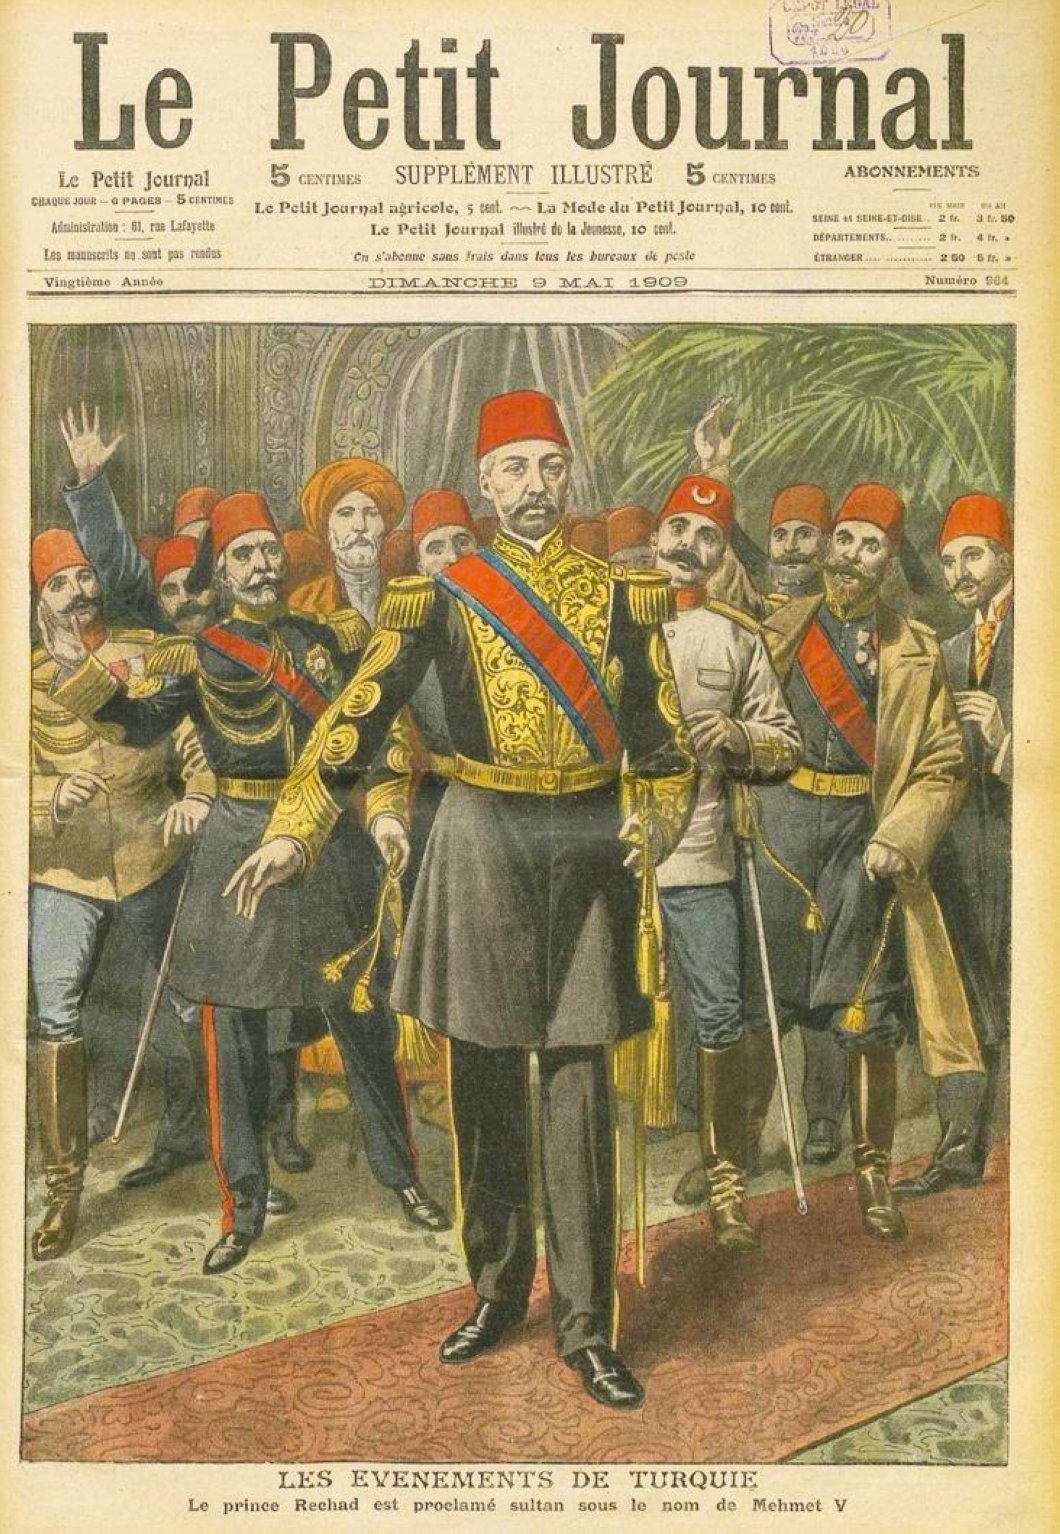 Le Petit Journal's coverage on Mehmed V's proclamation as the sultan.